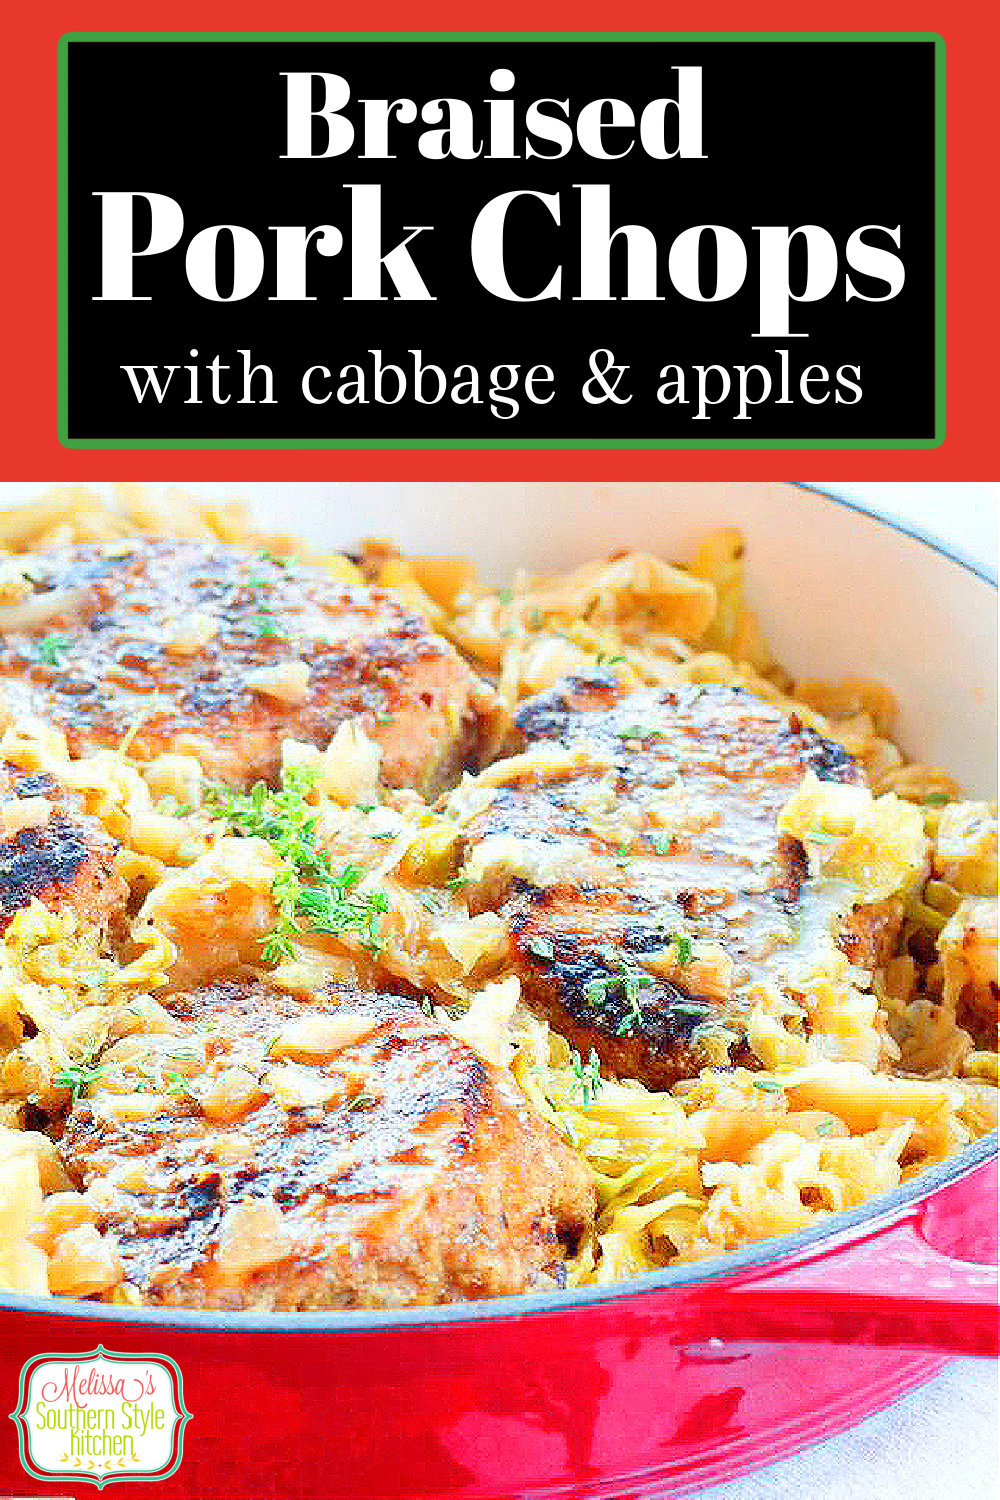 These thick cut pork chops are rubbed with Cajun seasonings then simmered with cabbage and apples until fall apart tender #porkchops #porkrecipes #cabbage #apples #braisedcabbage #braisedporkchops #fall #fallfood #southernrecipes #southernfood #harvestrecipes via @melissasssk